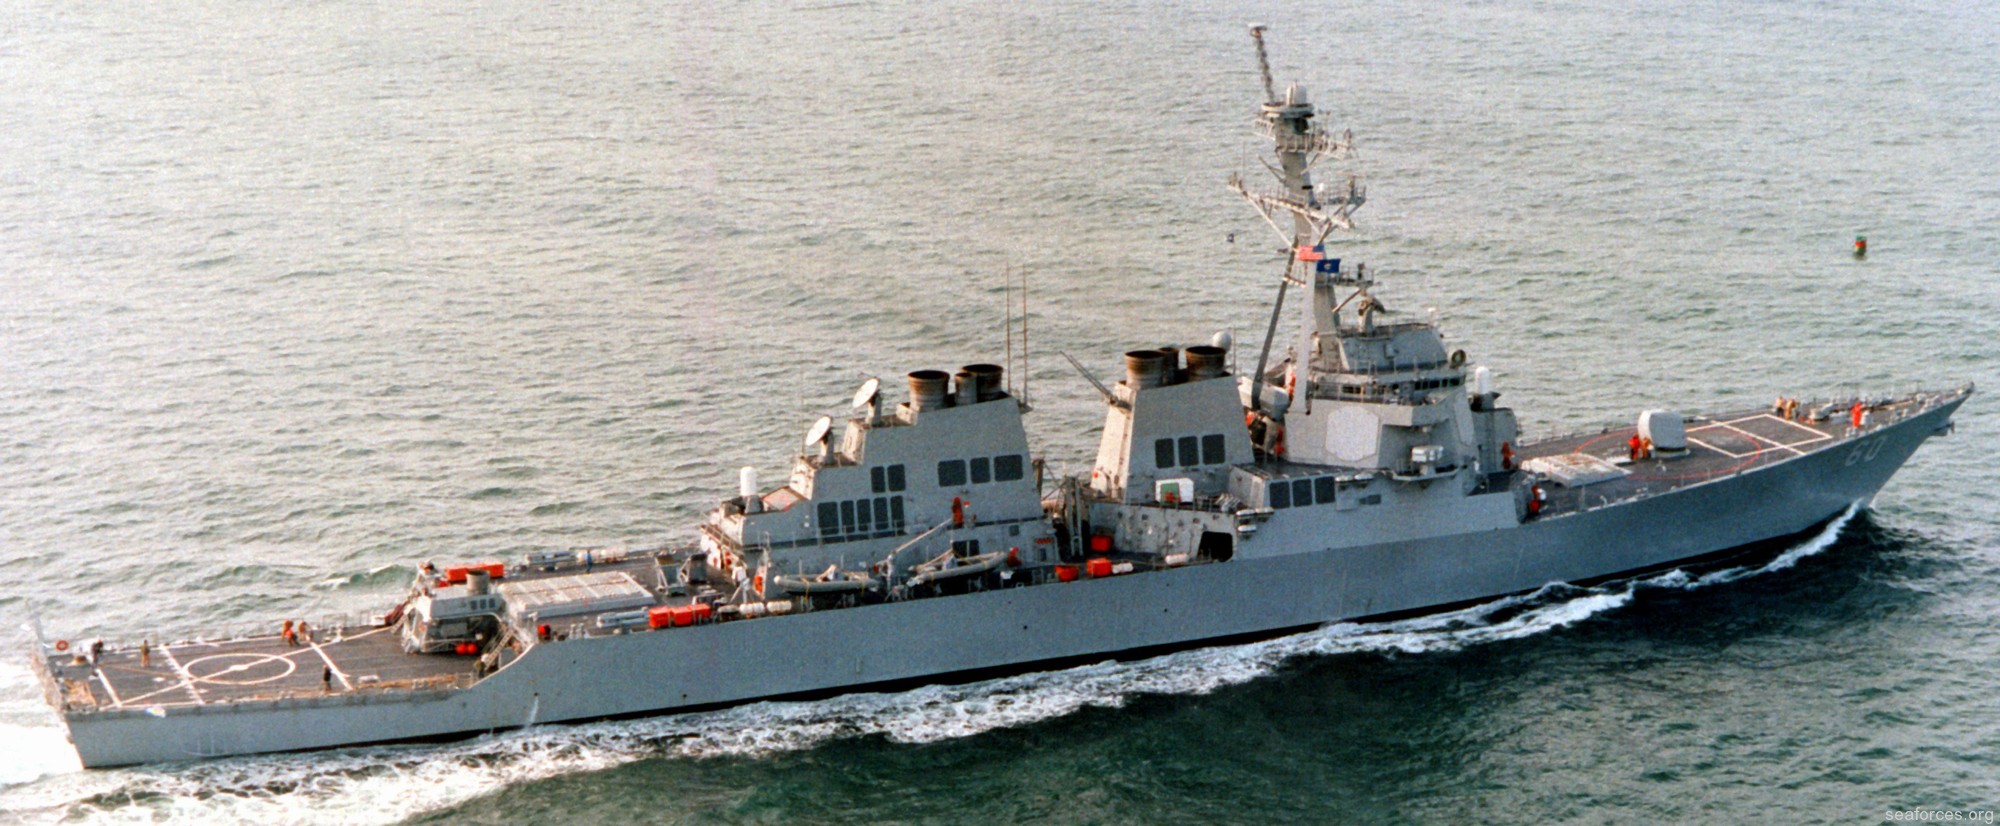 ddg-60 uss paul hamilton guided missile destroyer us navy 51